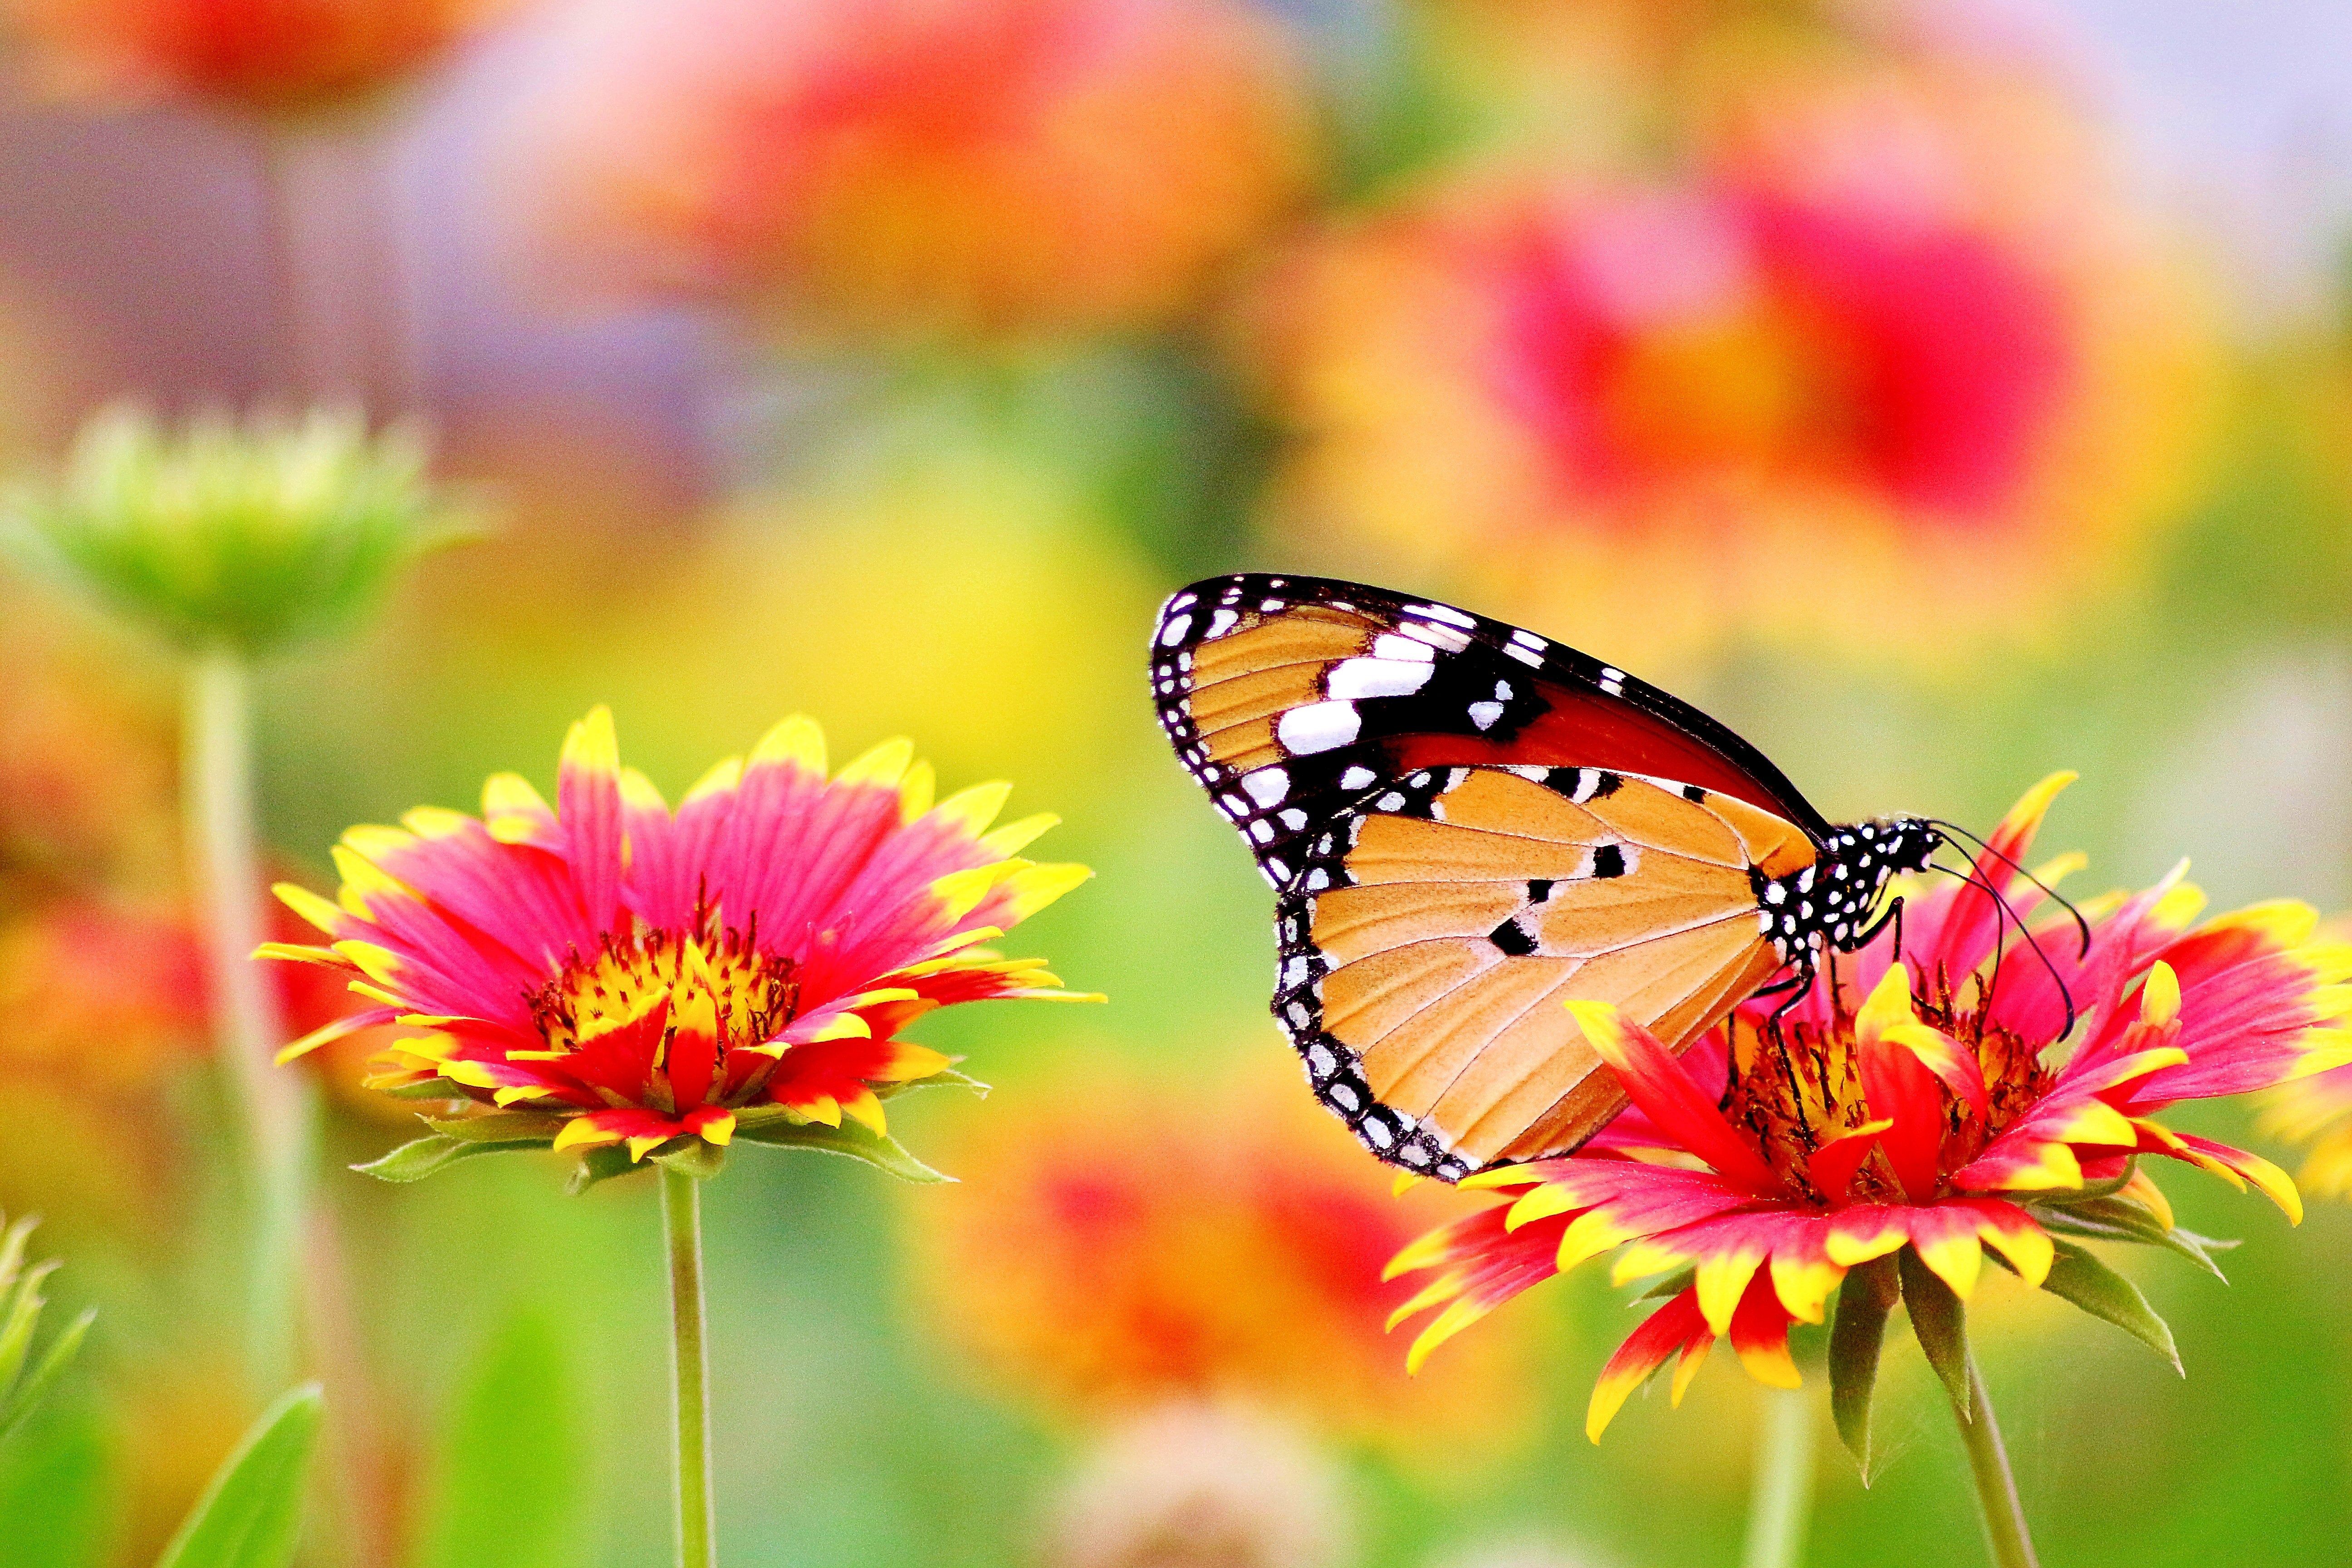 Orange, White, Black, Red Butterfly pollinating beautiful Pink, Red & Yellow flowers.